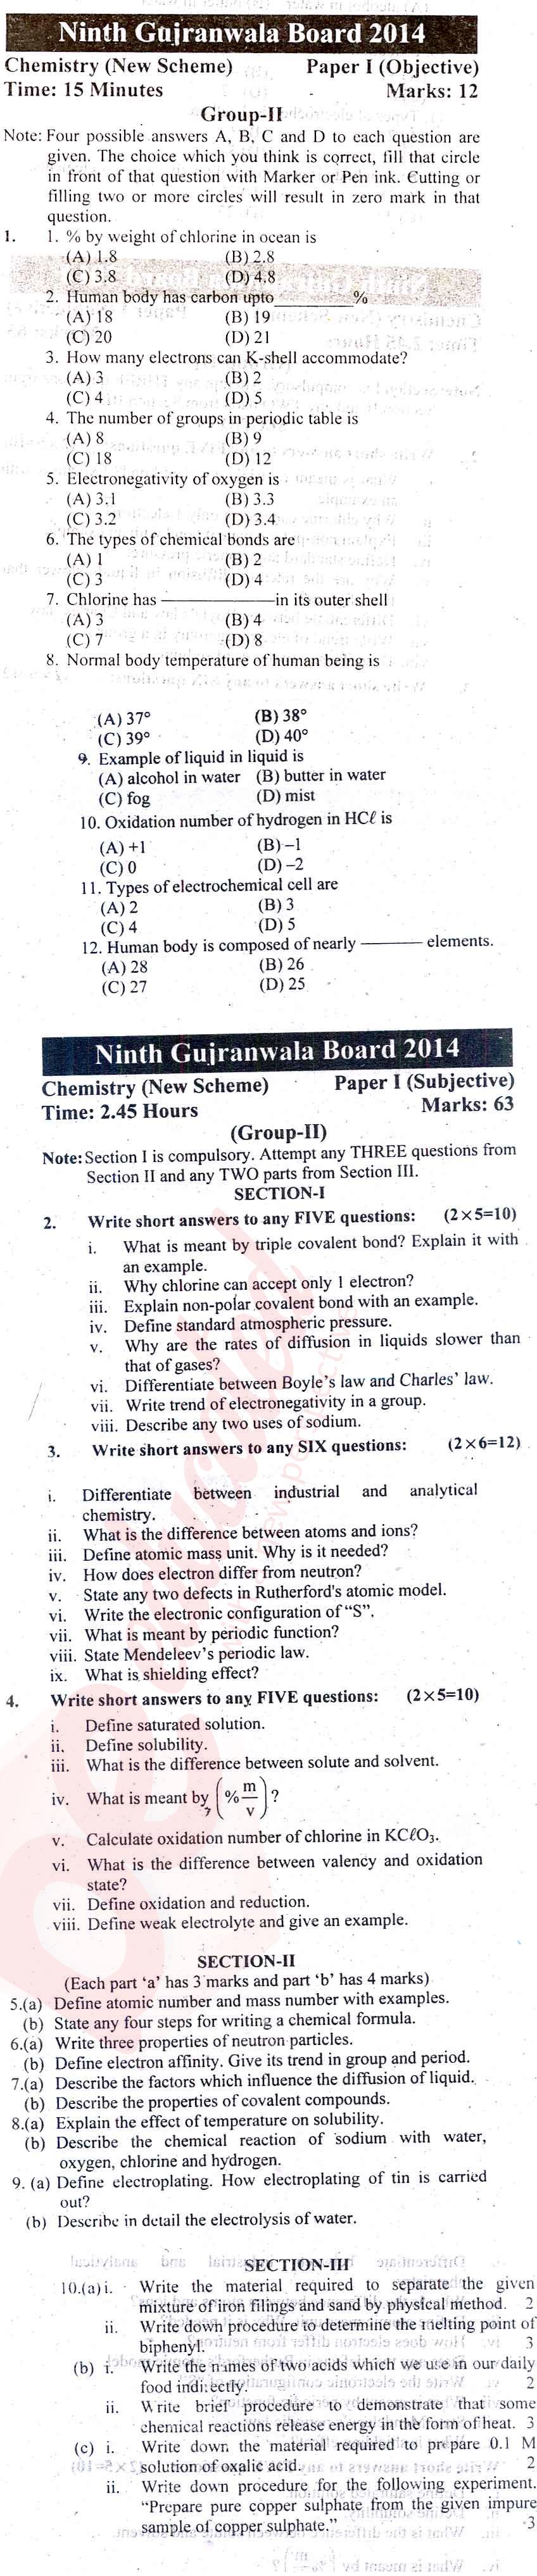 Chemistry 9th English Medium Past Paper Group 2 BISE Gujranwala 2014